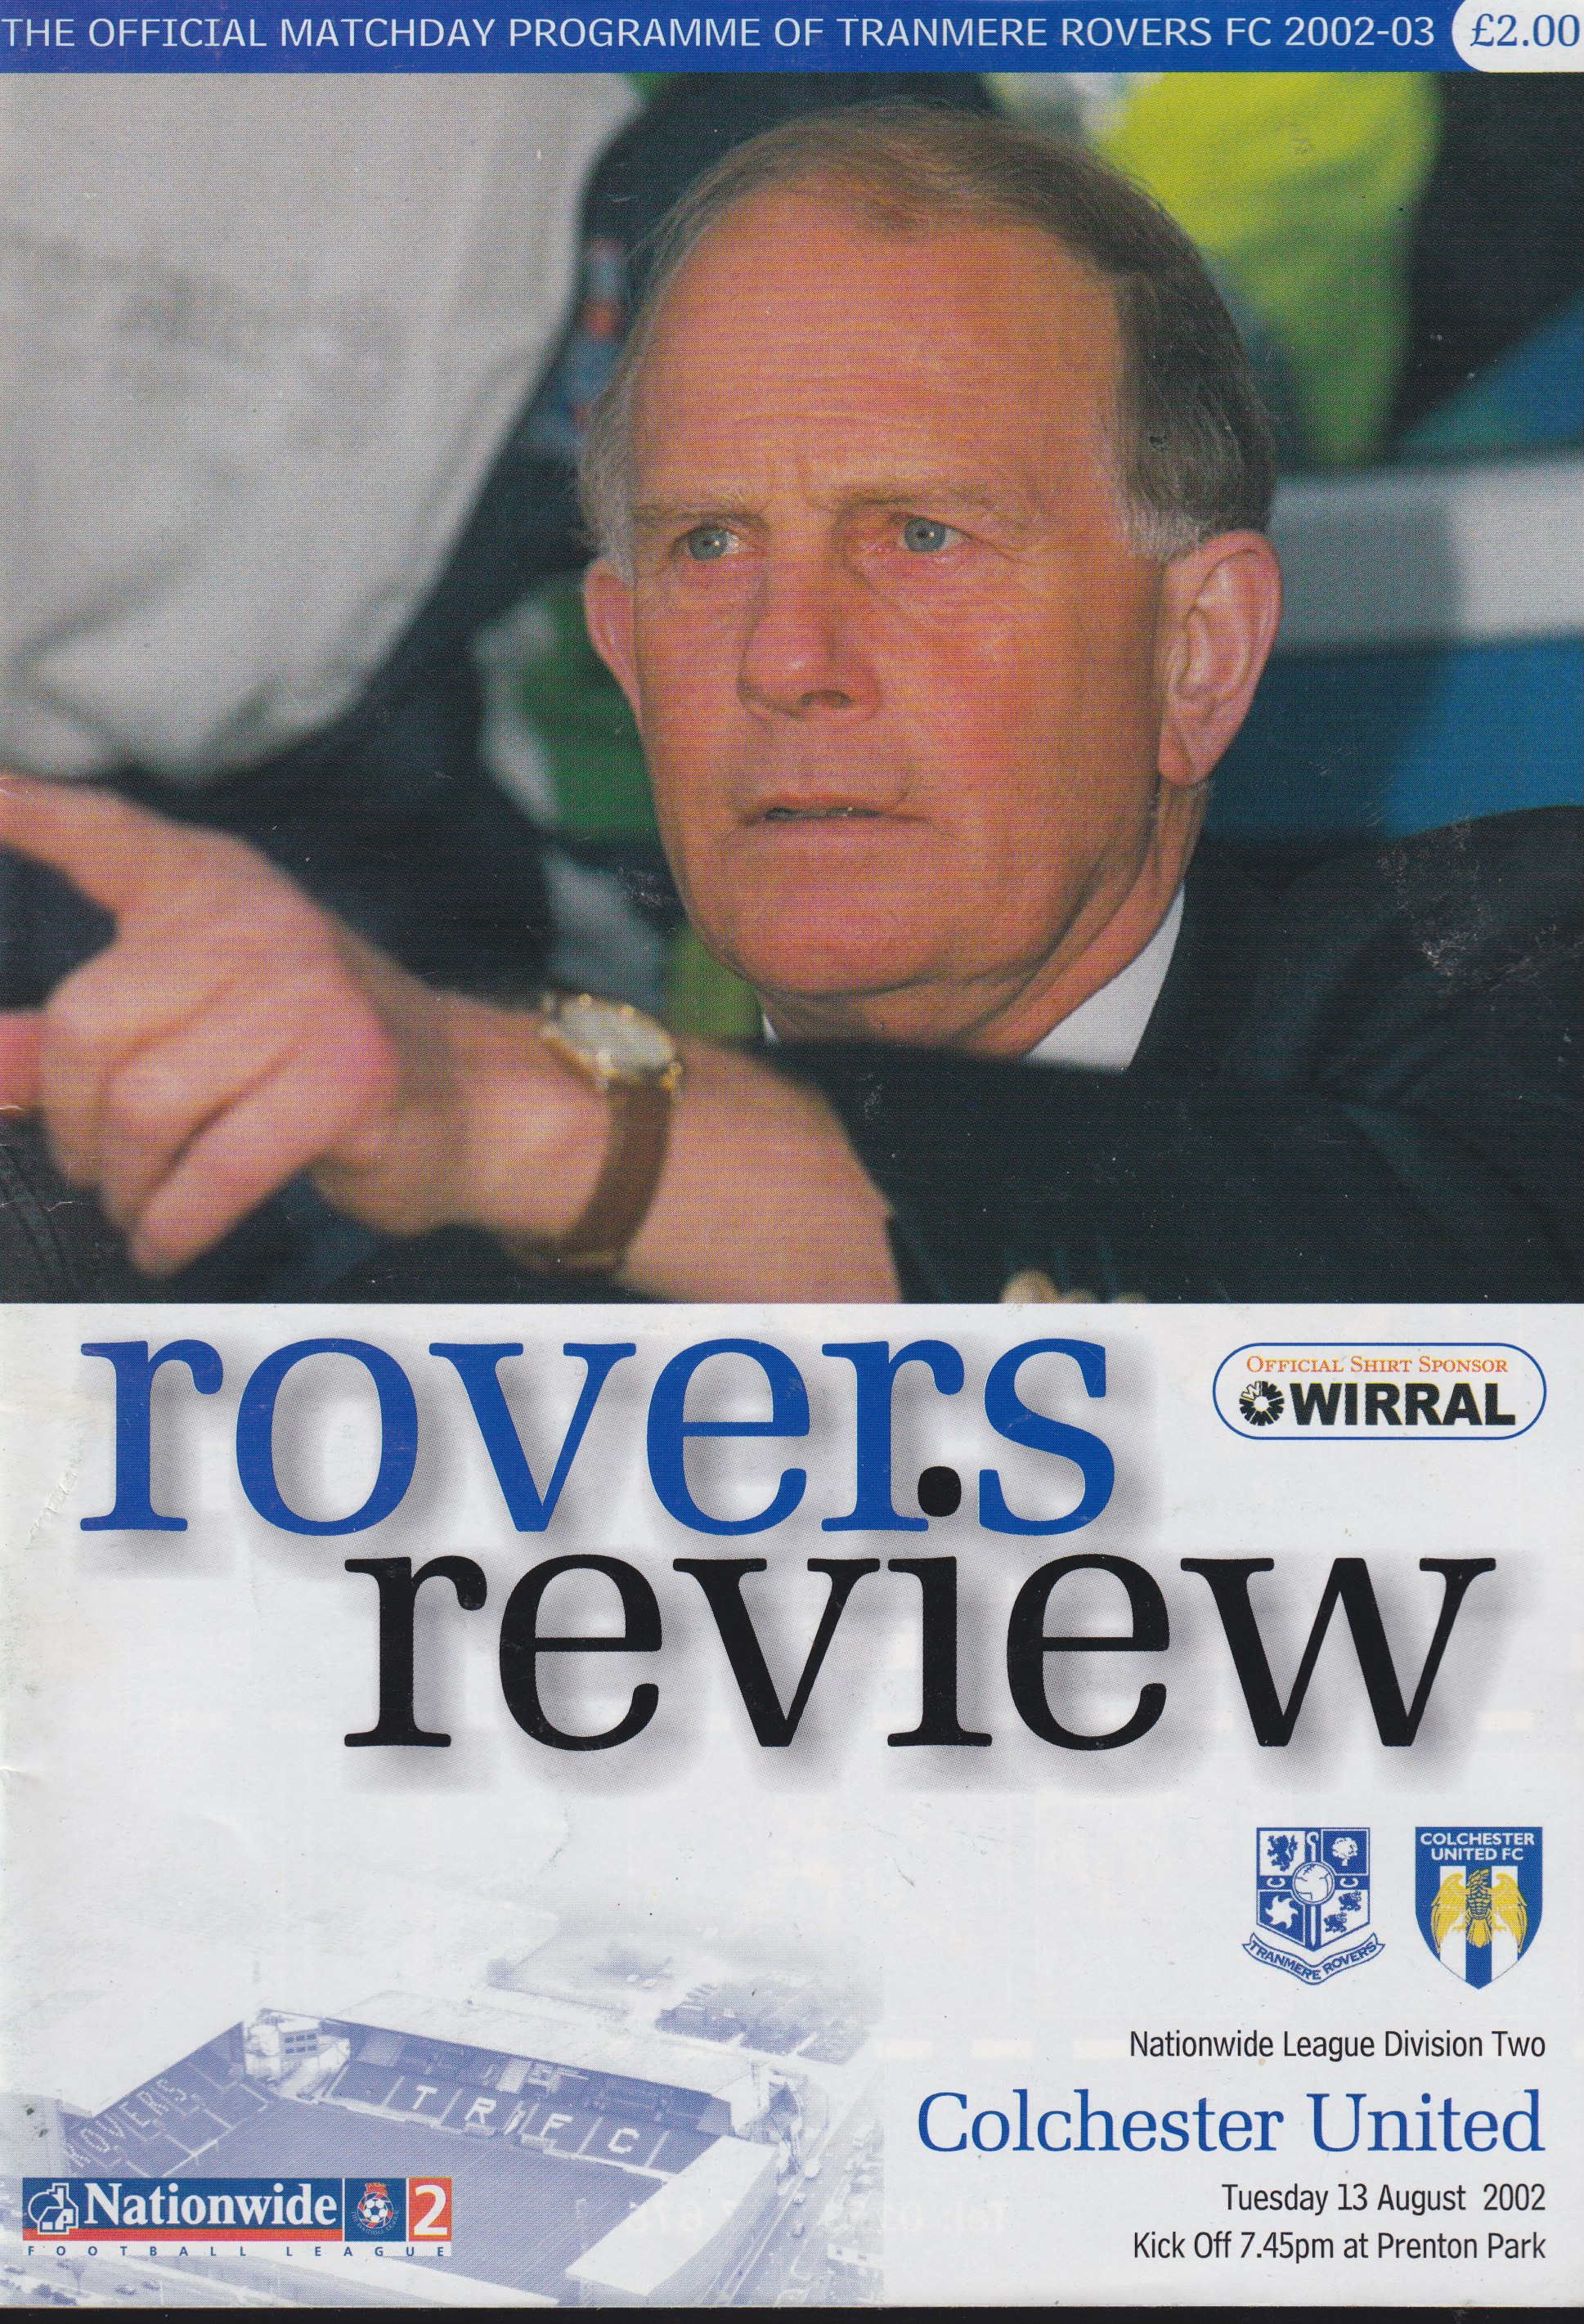 Match Programme For {home}} 1-1 Colchester United, League, 2002-08-13